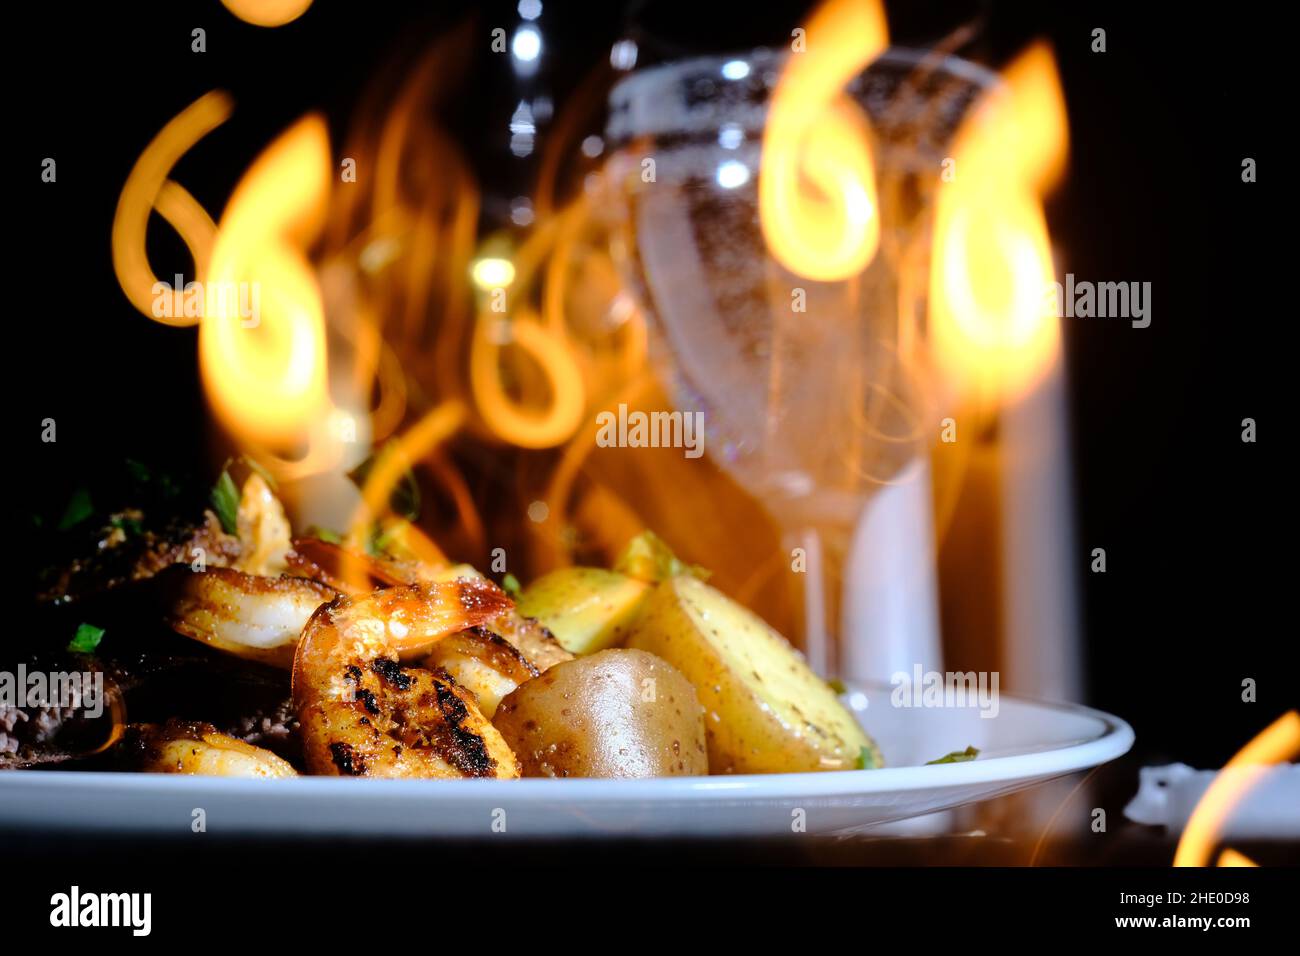 Gourmet surf and turf cajun shrimp and steak dinner entree with new potatoes at a fancy expensive wedding with number 6 background blur Stock Photo